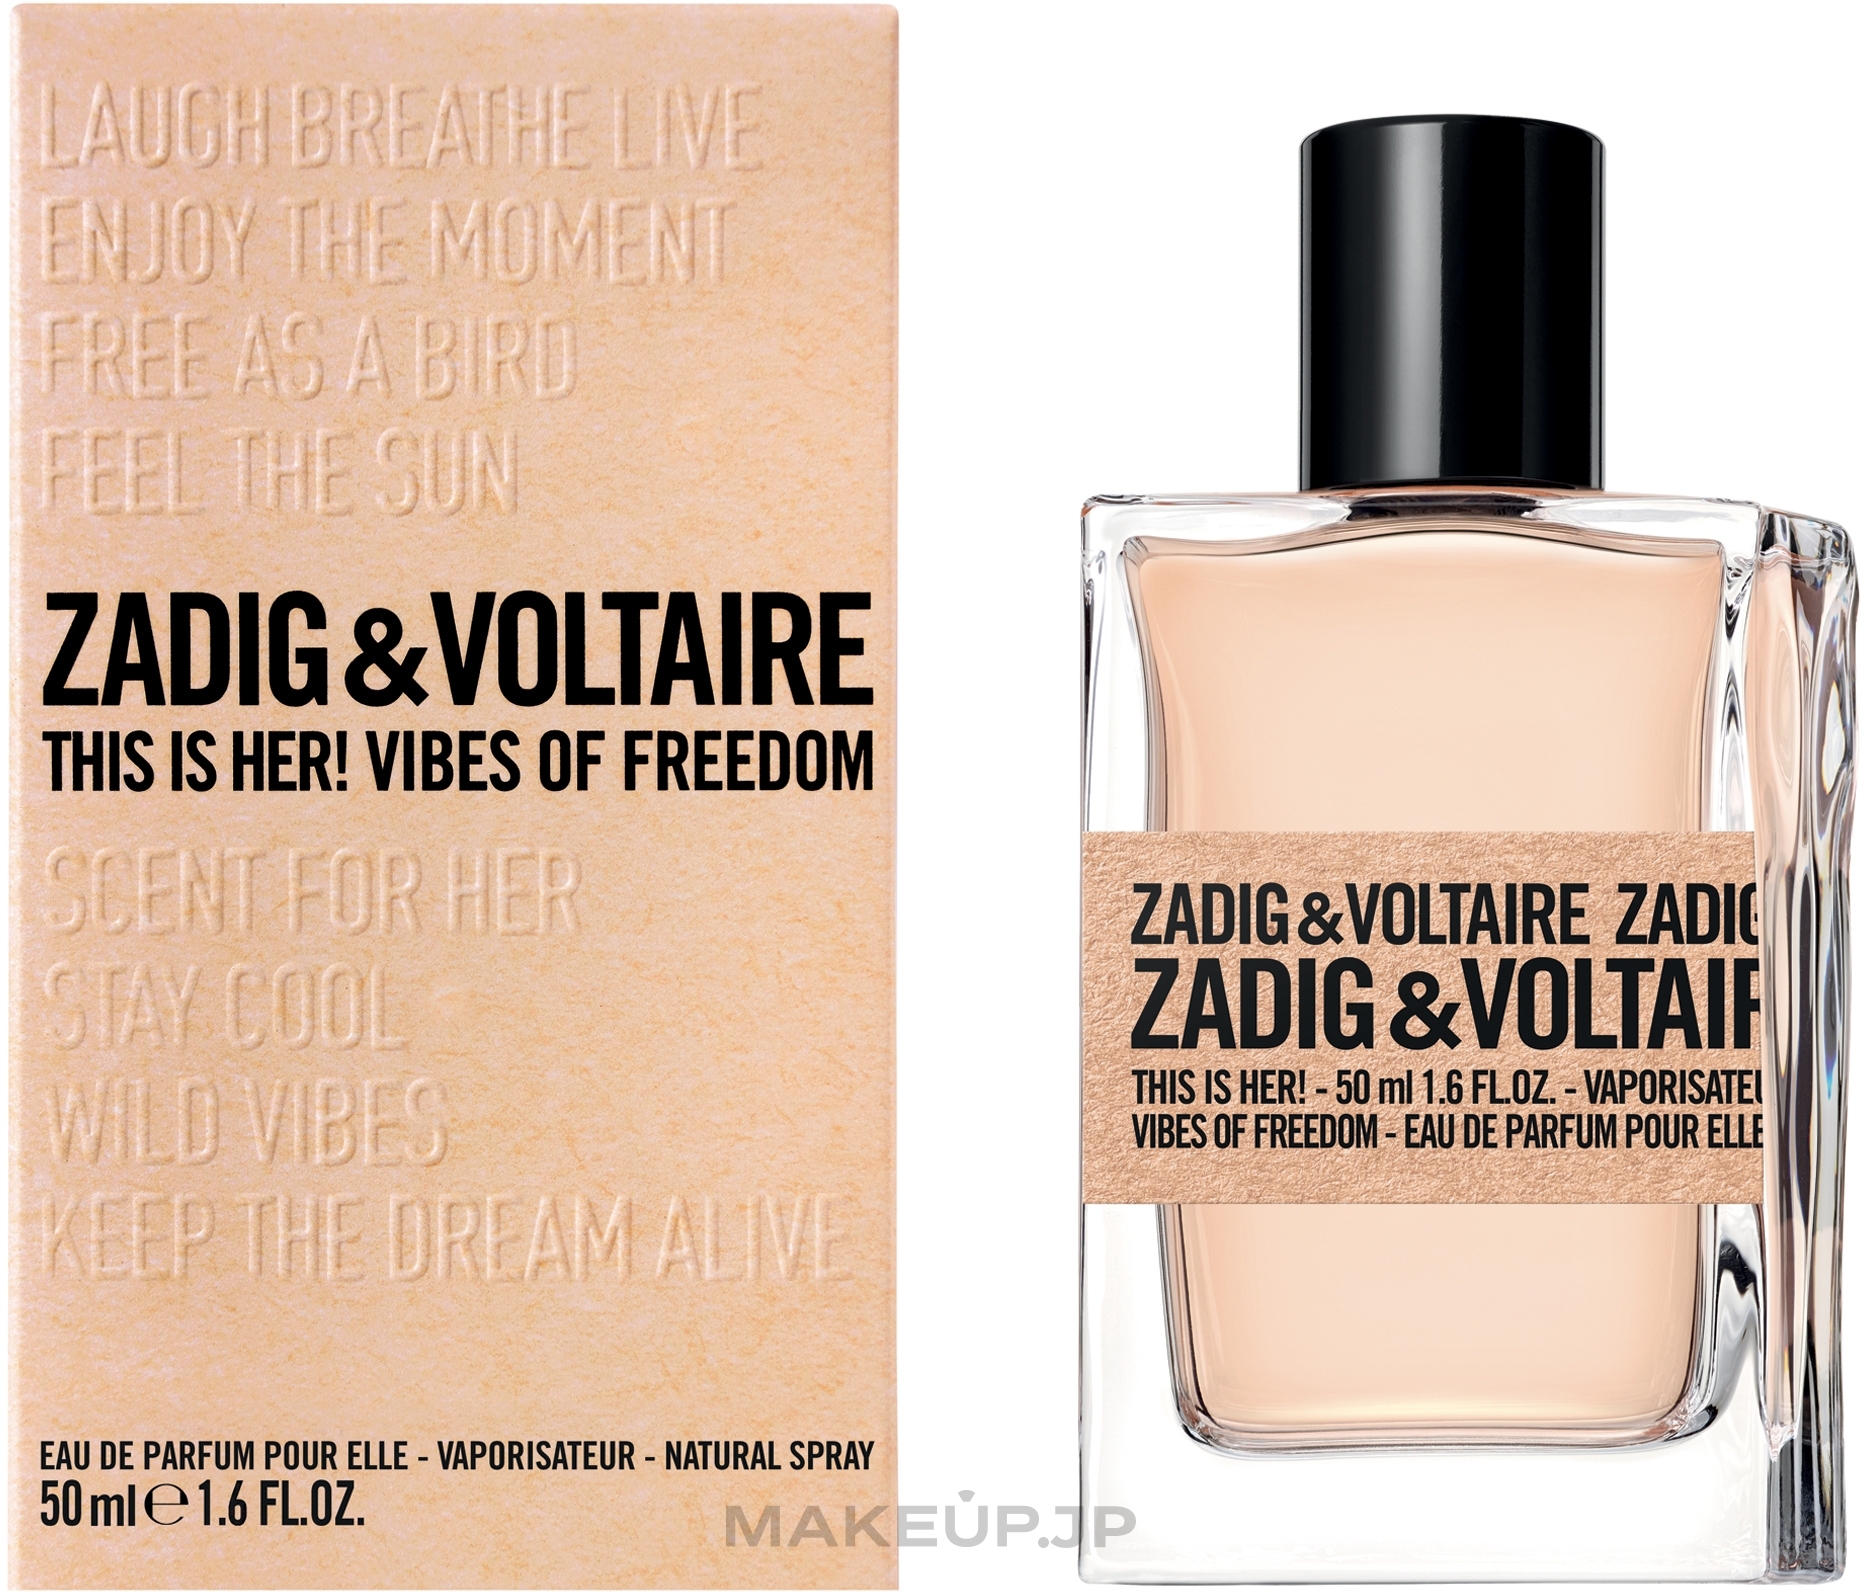 Zadig & Voltaire This Is Her! Vibes Of Freedom - Eau de Parfum — photo 50 ml